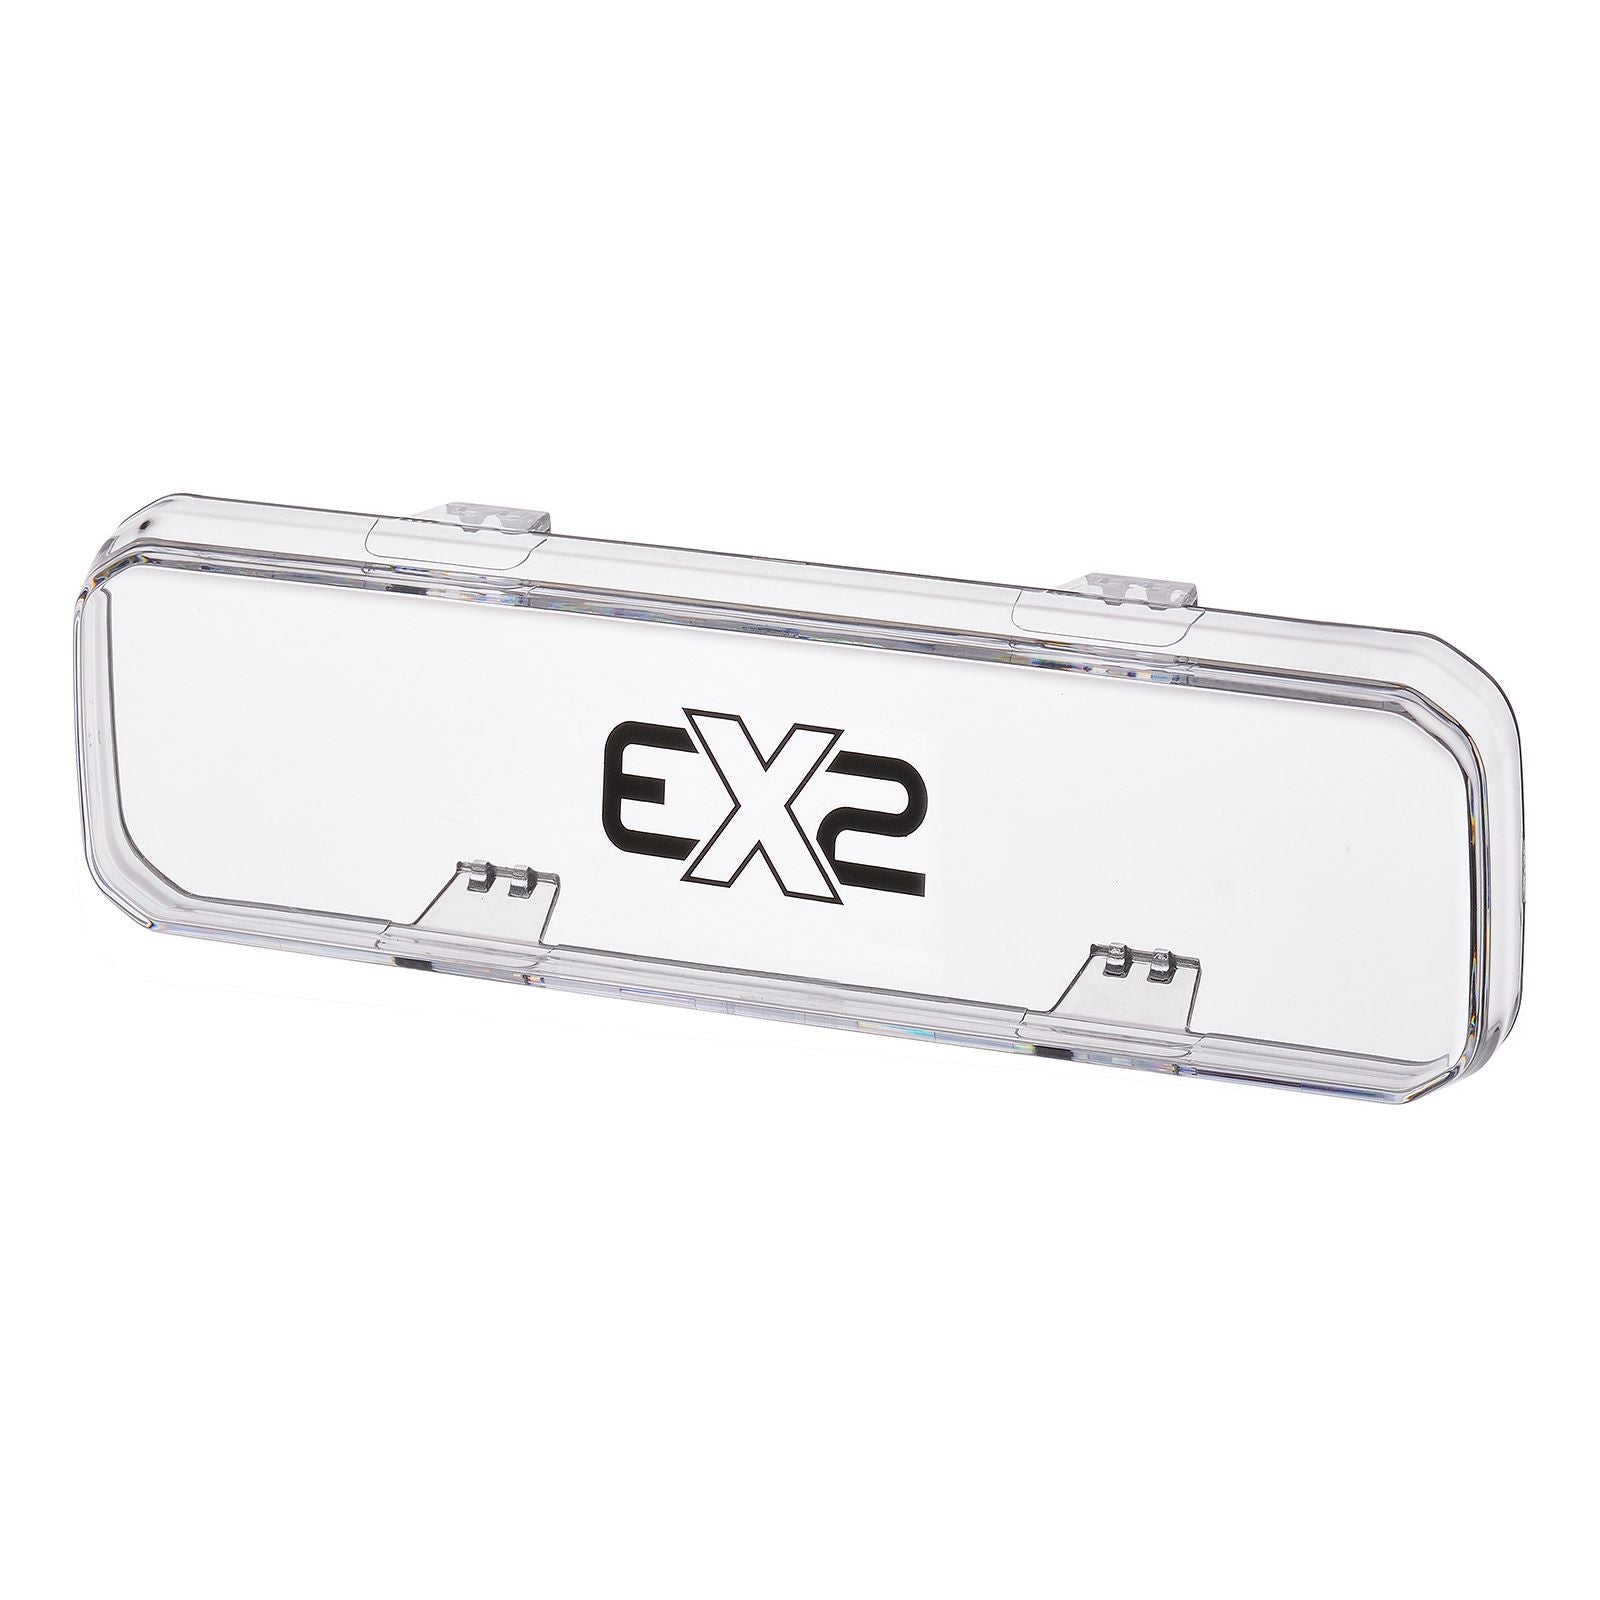 10" DOUBLE ROW CLEAR LENS COVER EX2 EX2R LIGHT BAR ONLY